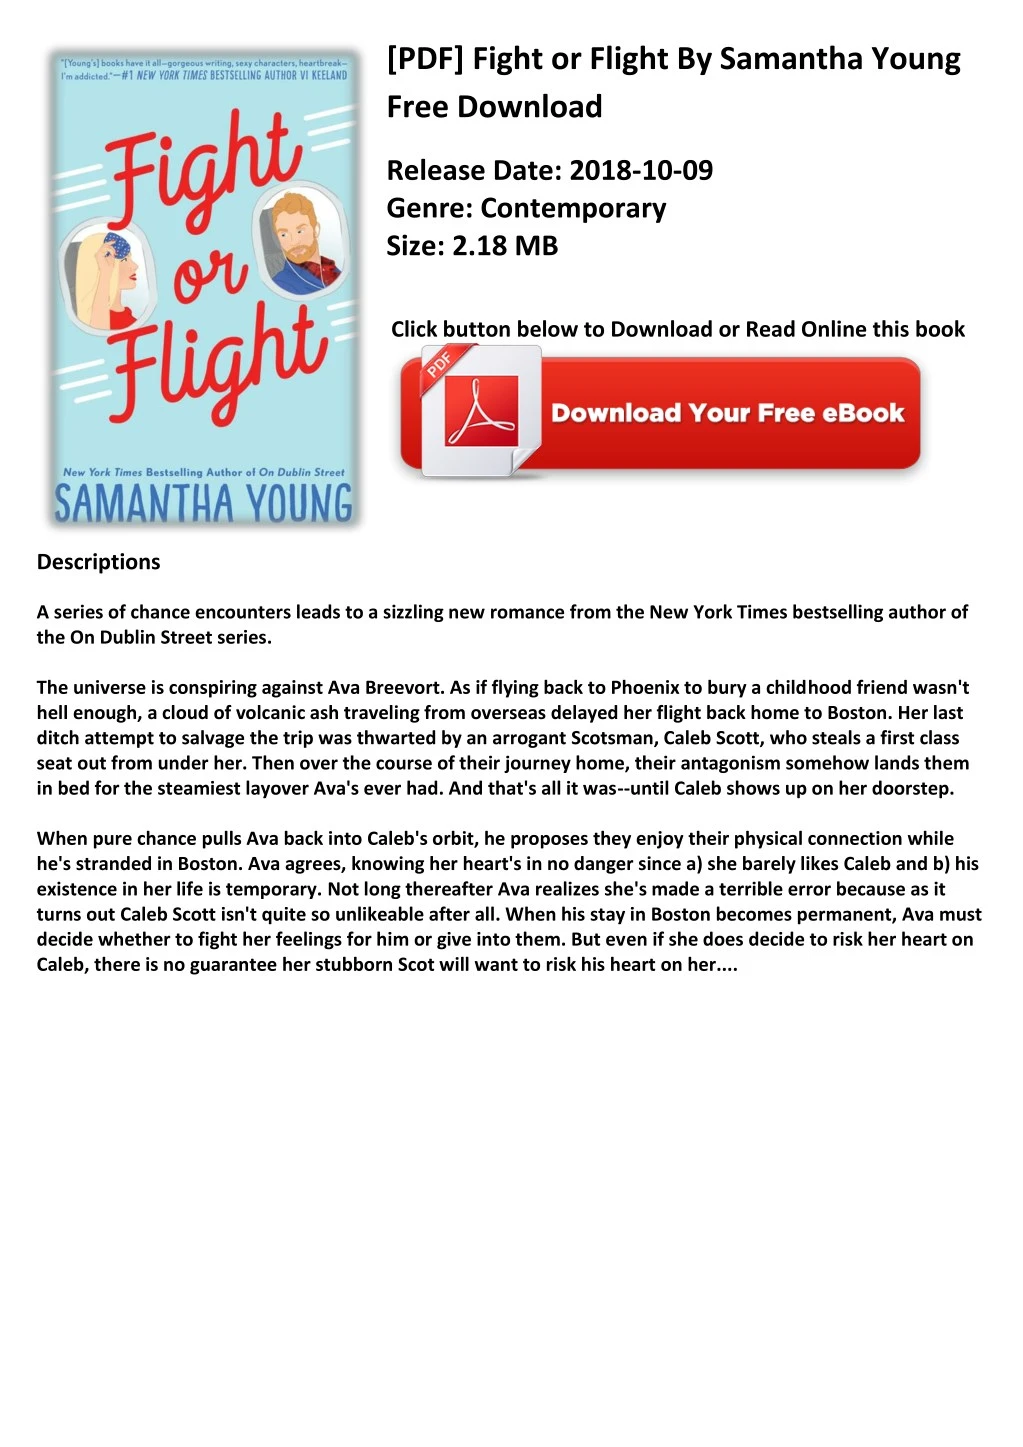 pdf fight or flight by samantha young free